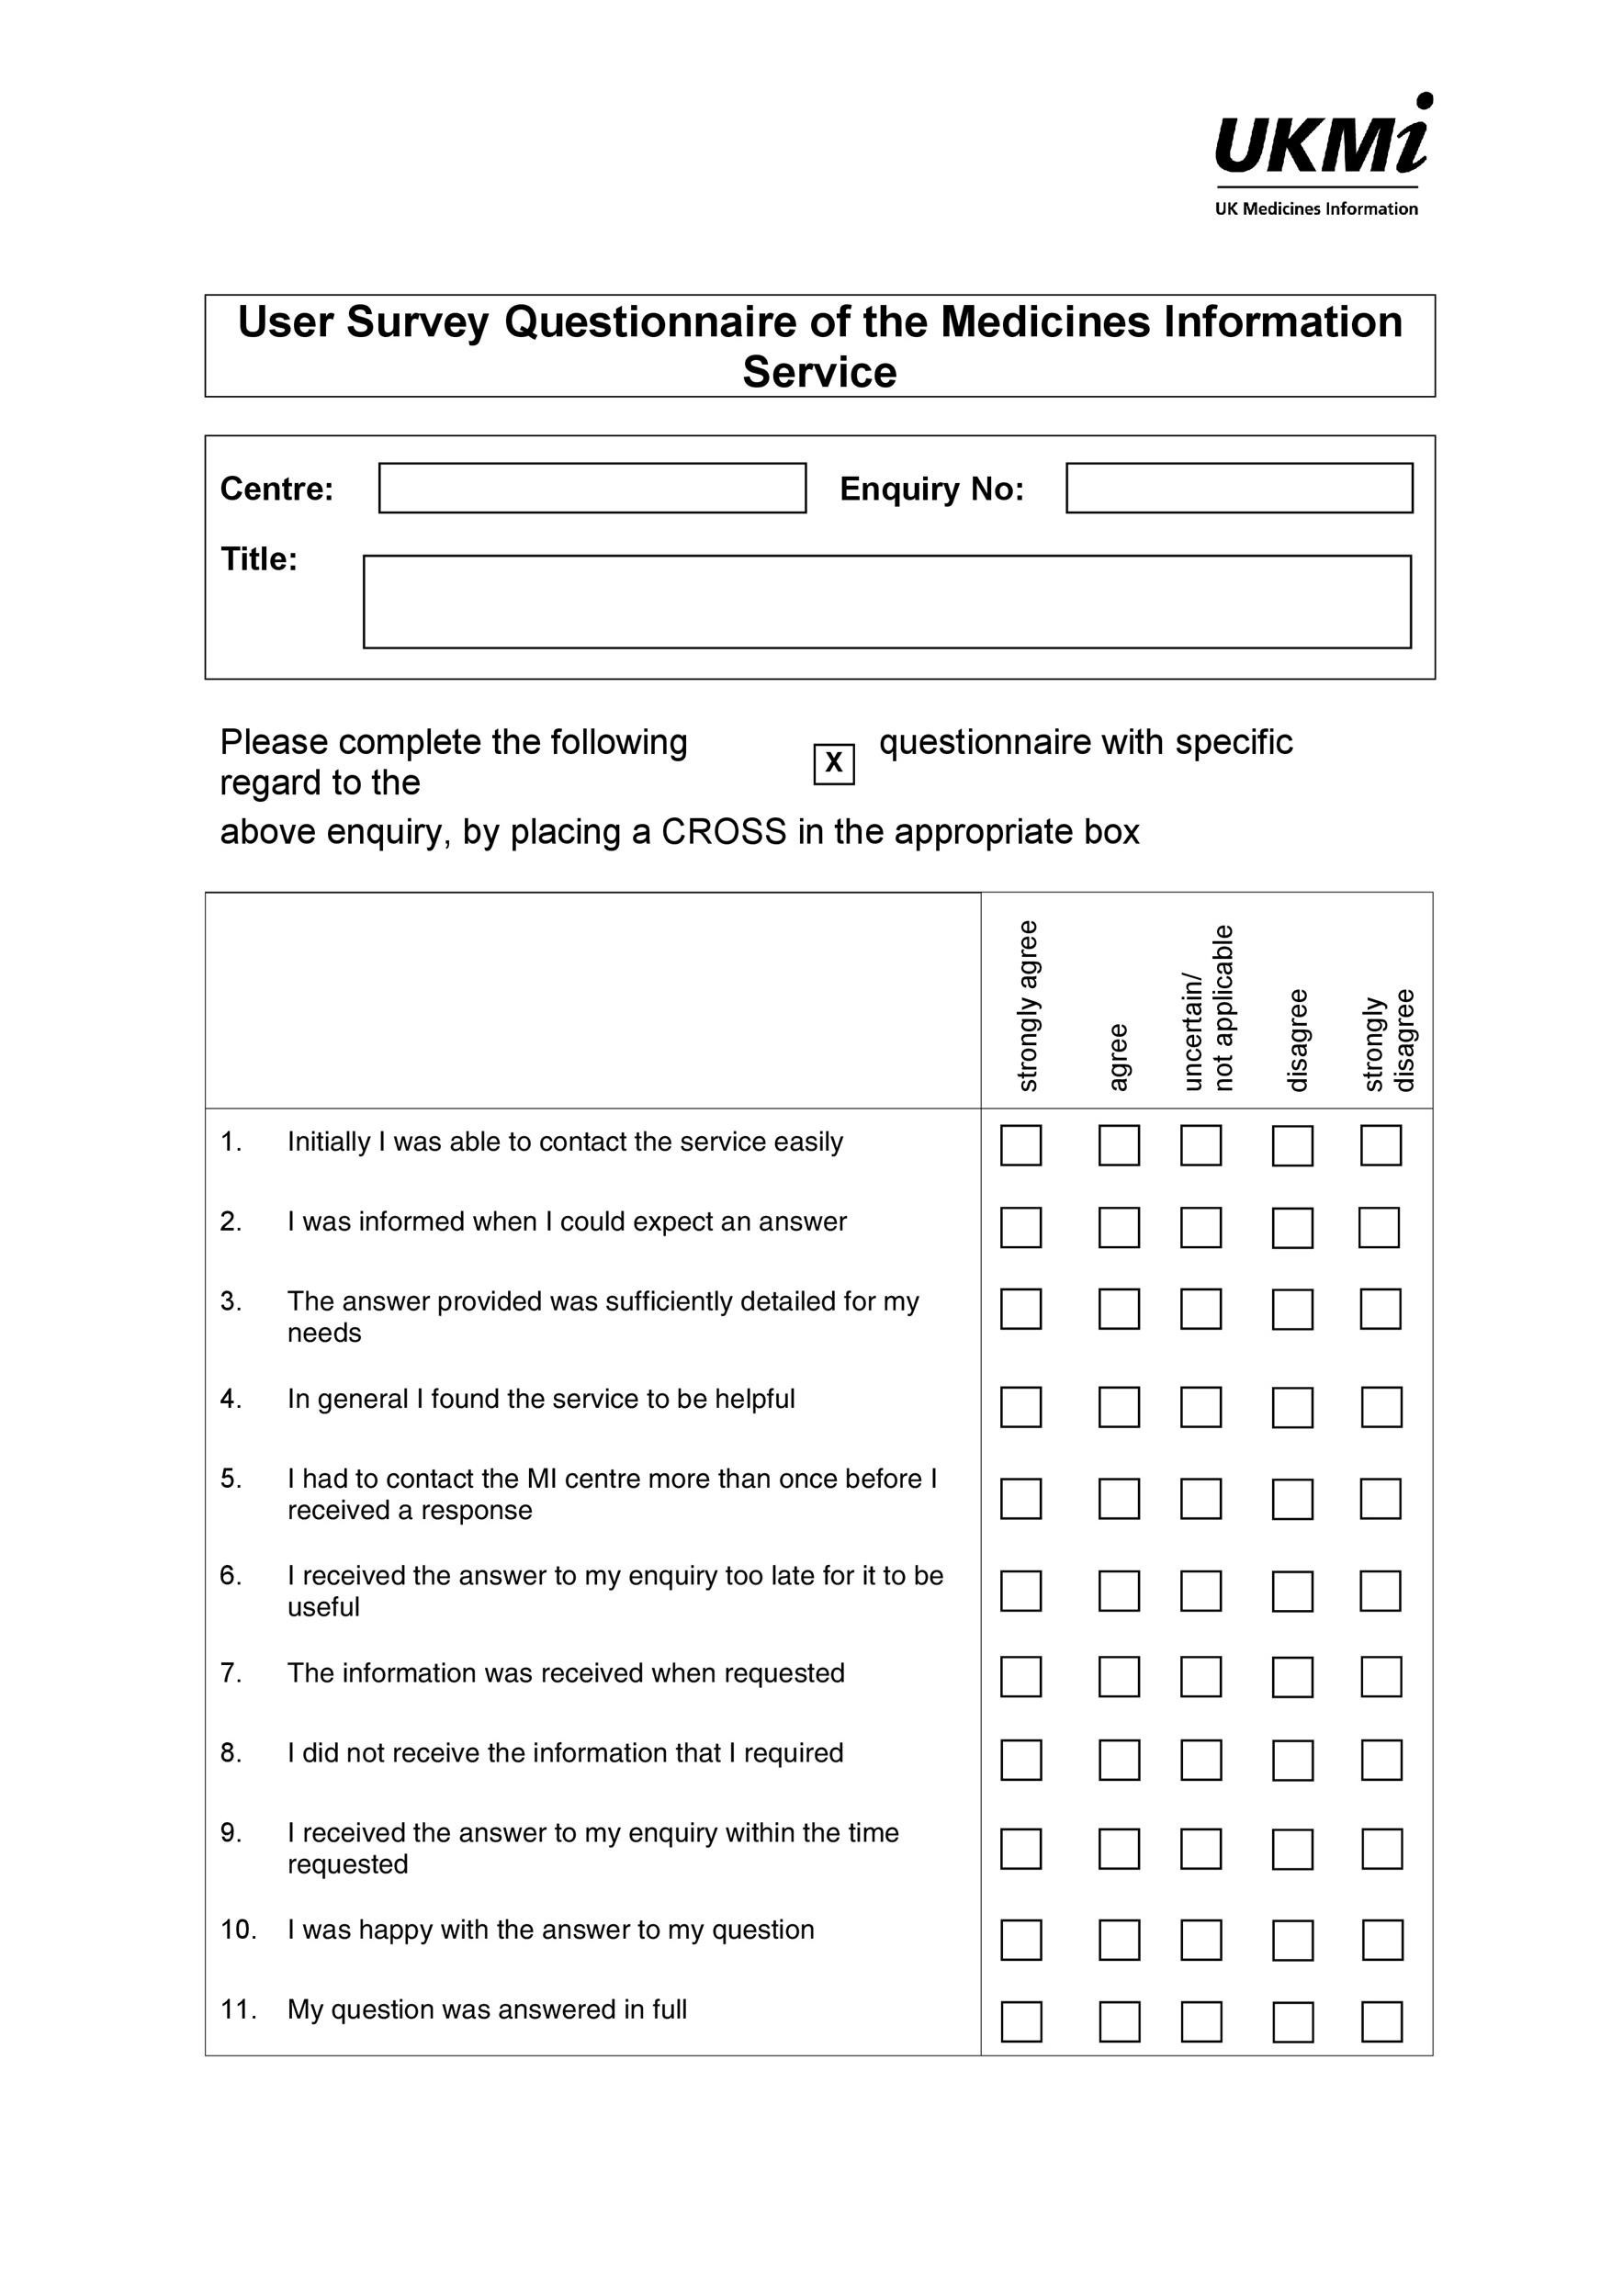 30+ Questionnaire Templates (Word) ᐅ TemplateLab